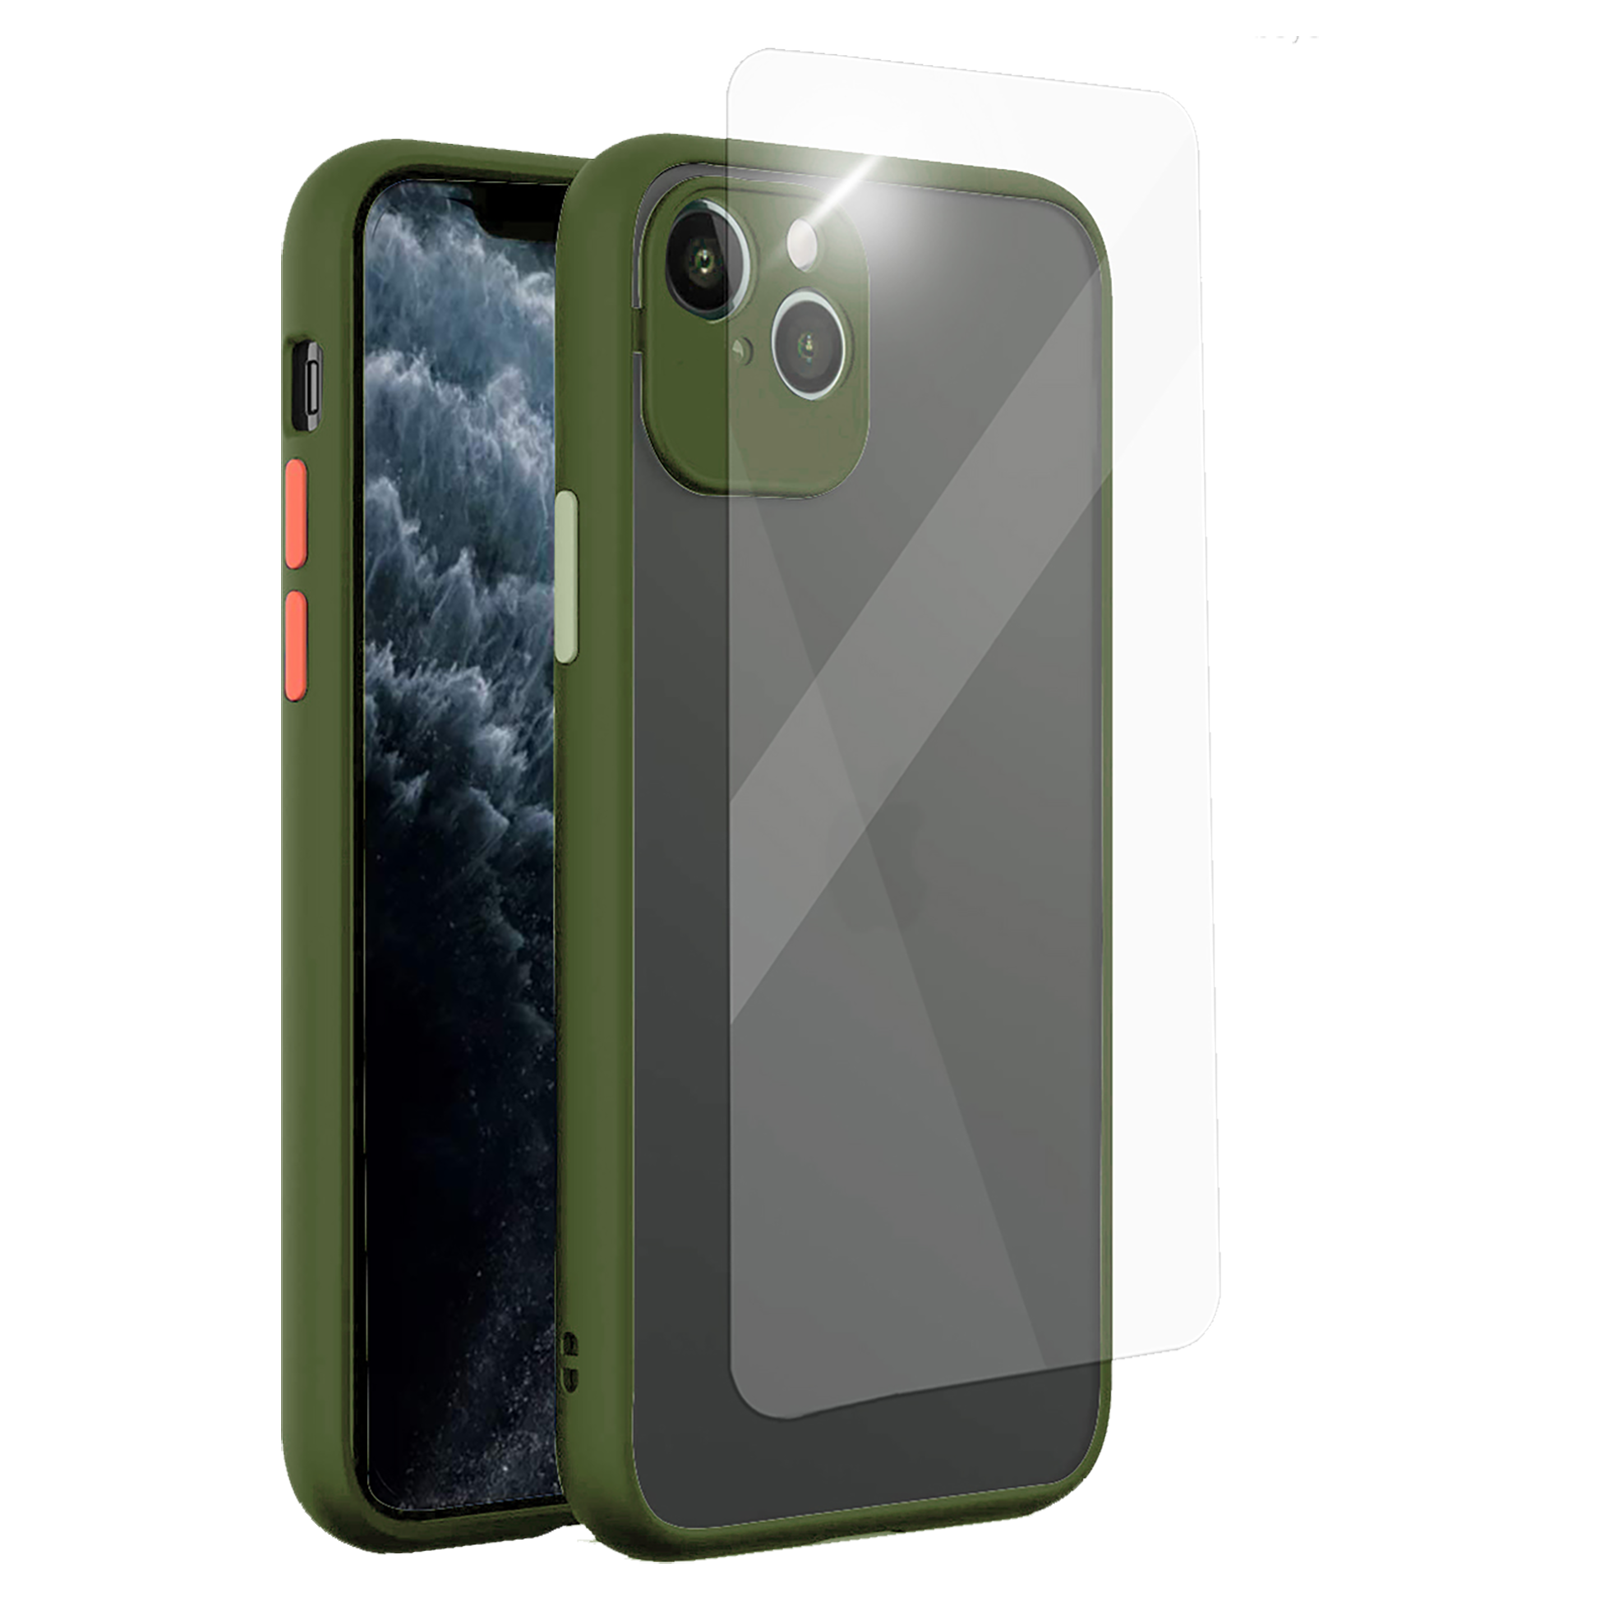 Arrow Duplex Back Case and Screen Protector Combo For iPhone 13 Mini (Enhanced Camera Protection, AR-1279, Light Green)_1